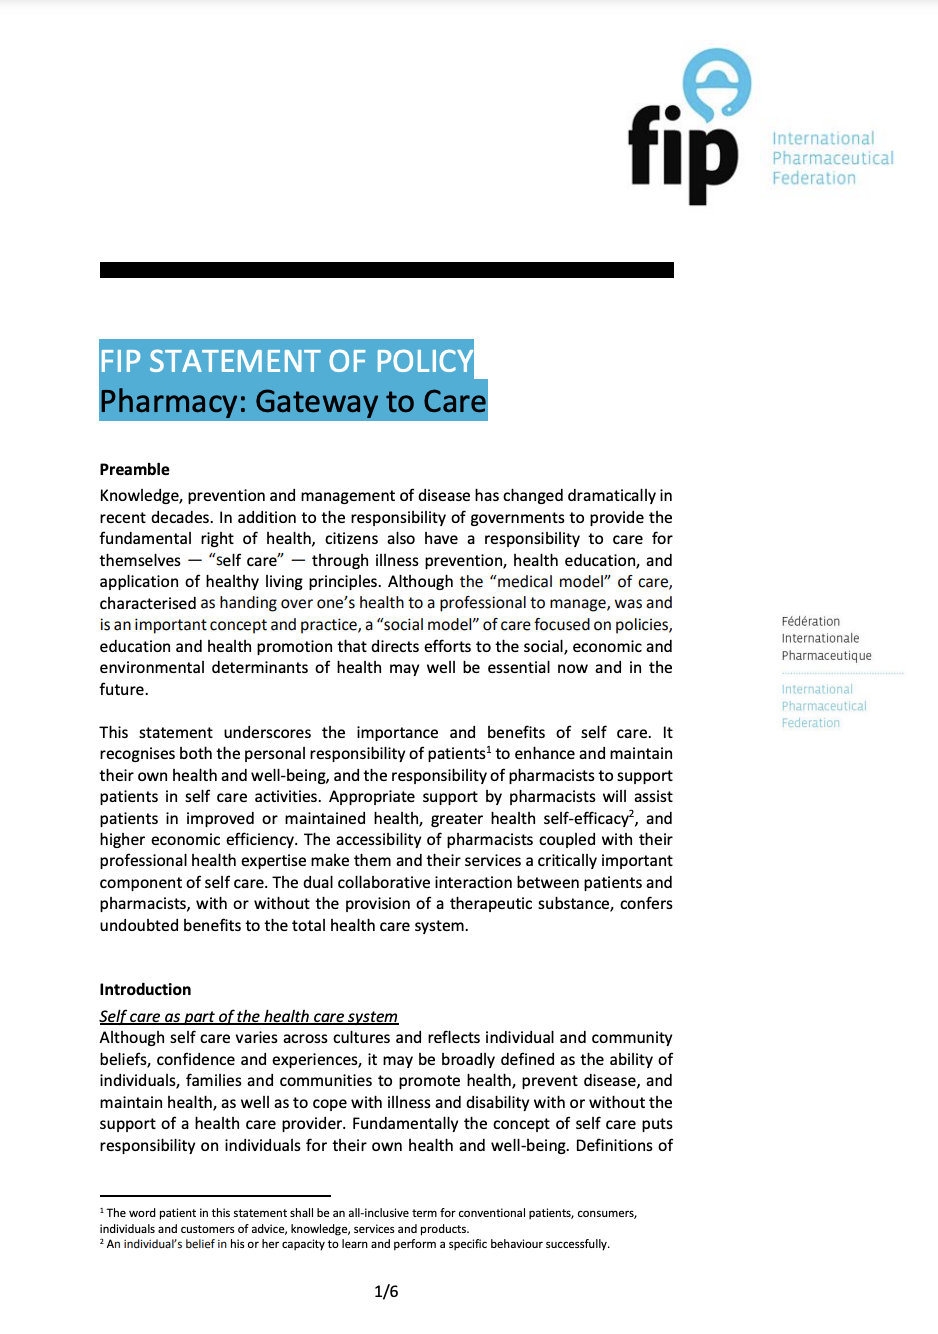 FIP Statement of Policy: Pharmacy - Gateway to Care (2017) Thumbnail